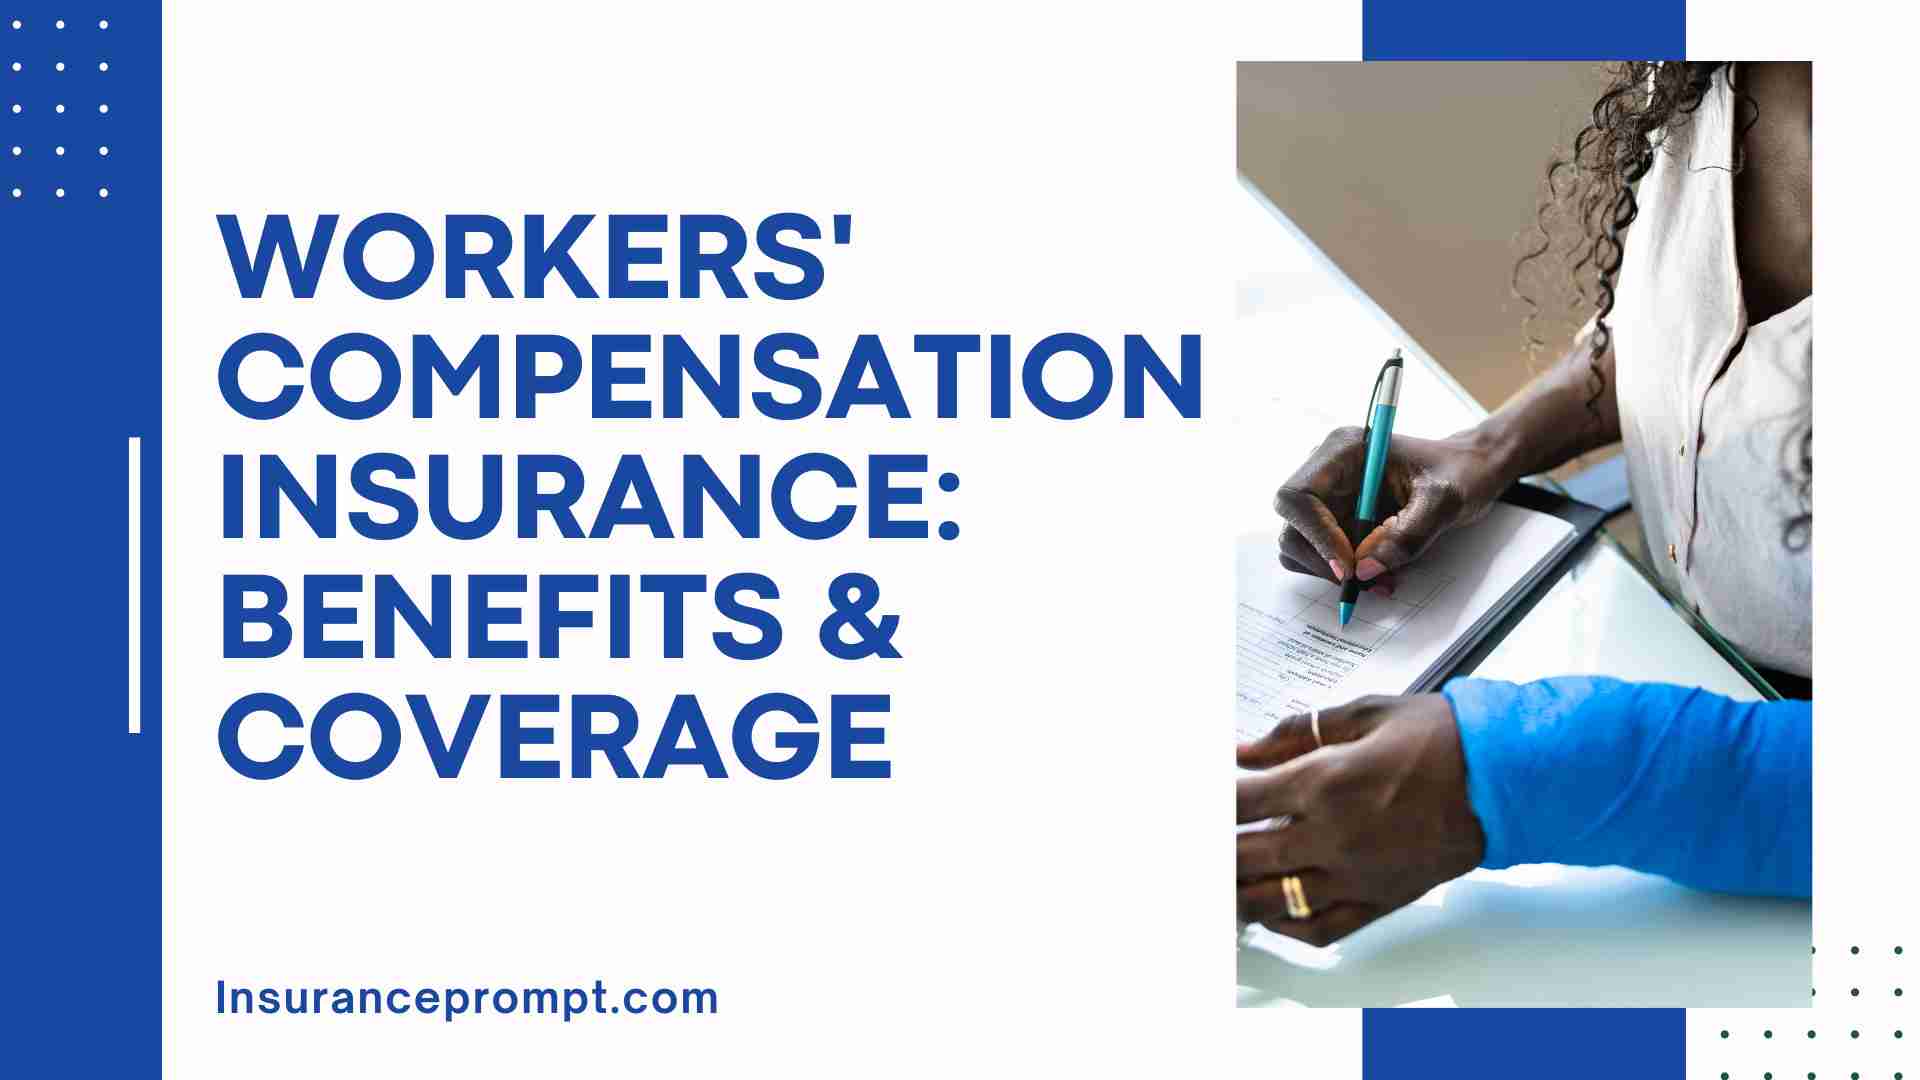 Workers' Compensation Insurance in 2023 Benefits & Coverage